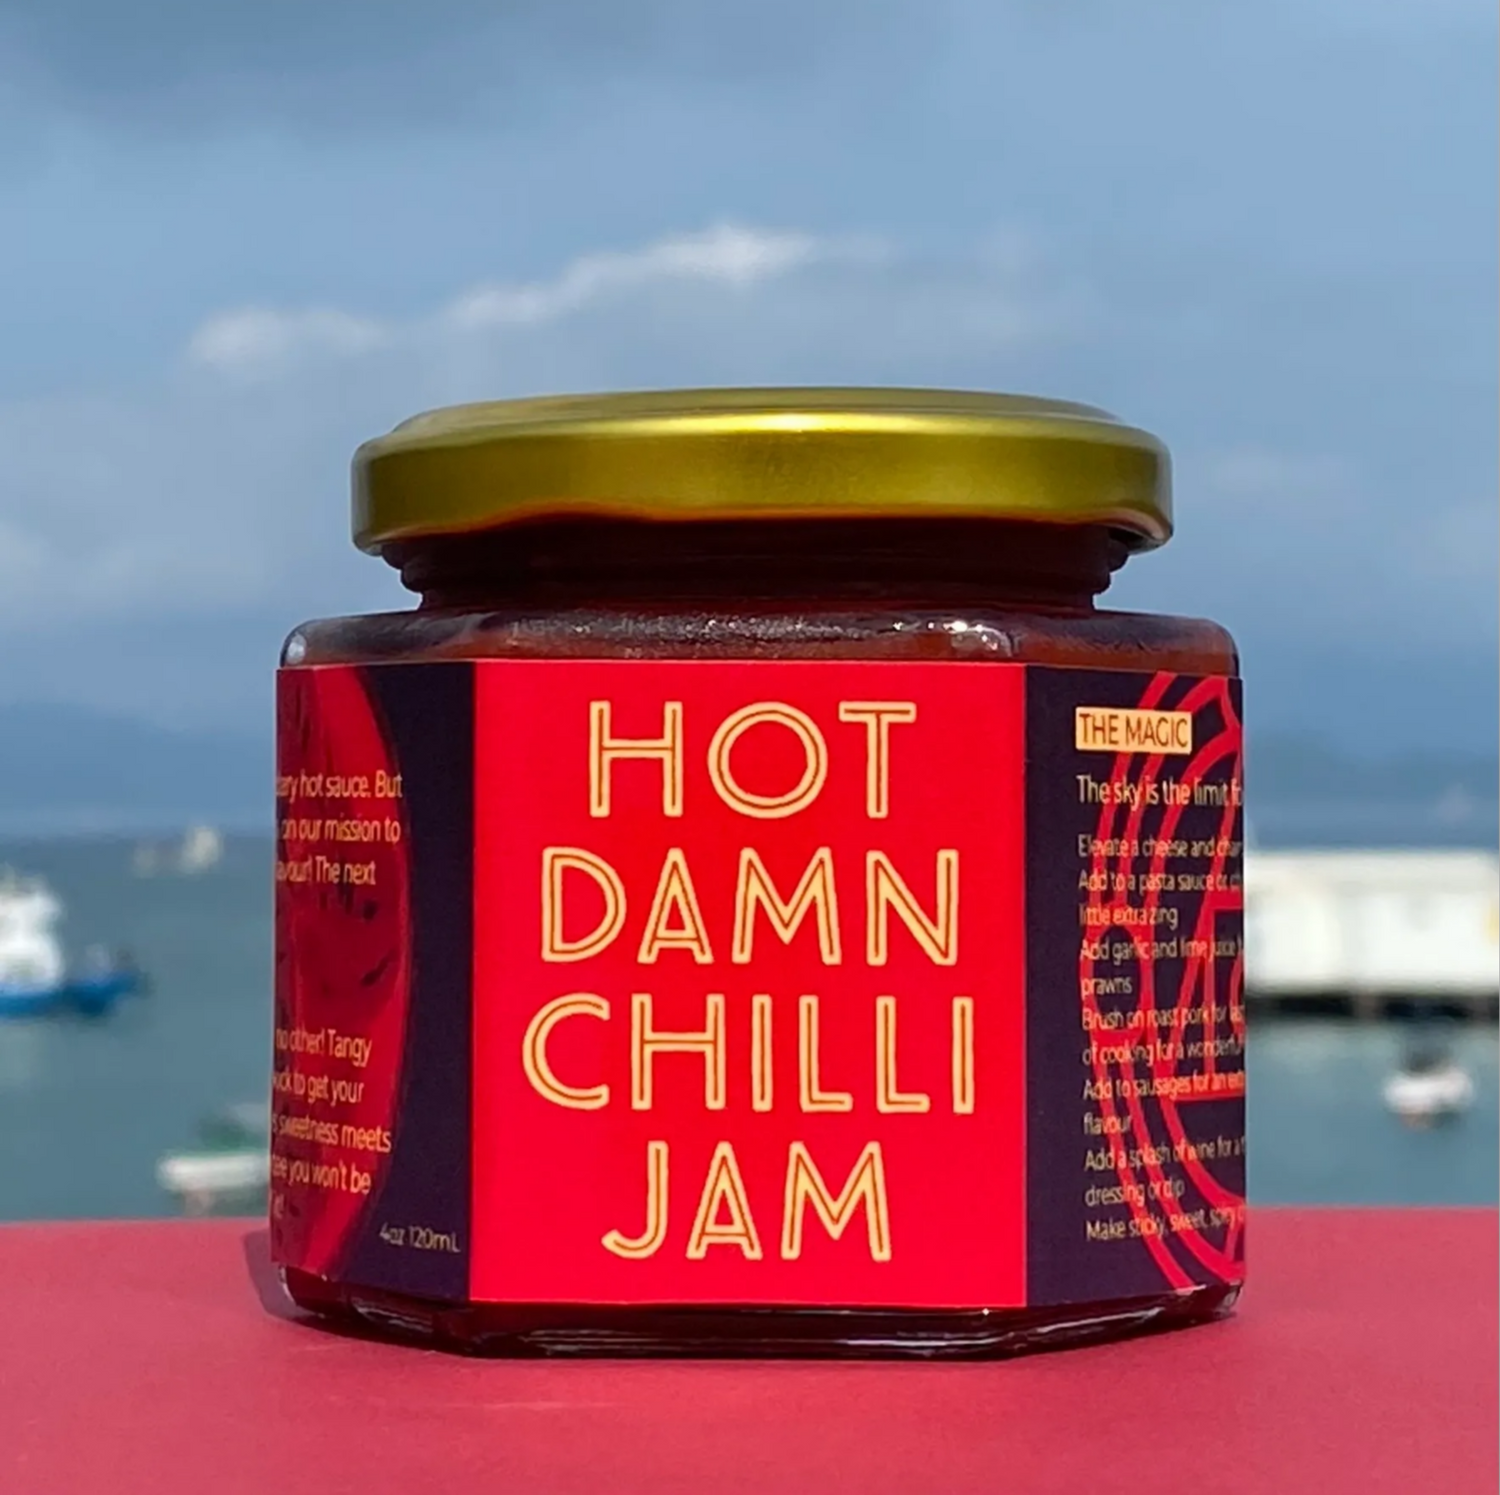 A jar of Hot Damn Chilli Jam on the roof in Lamma